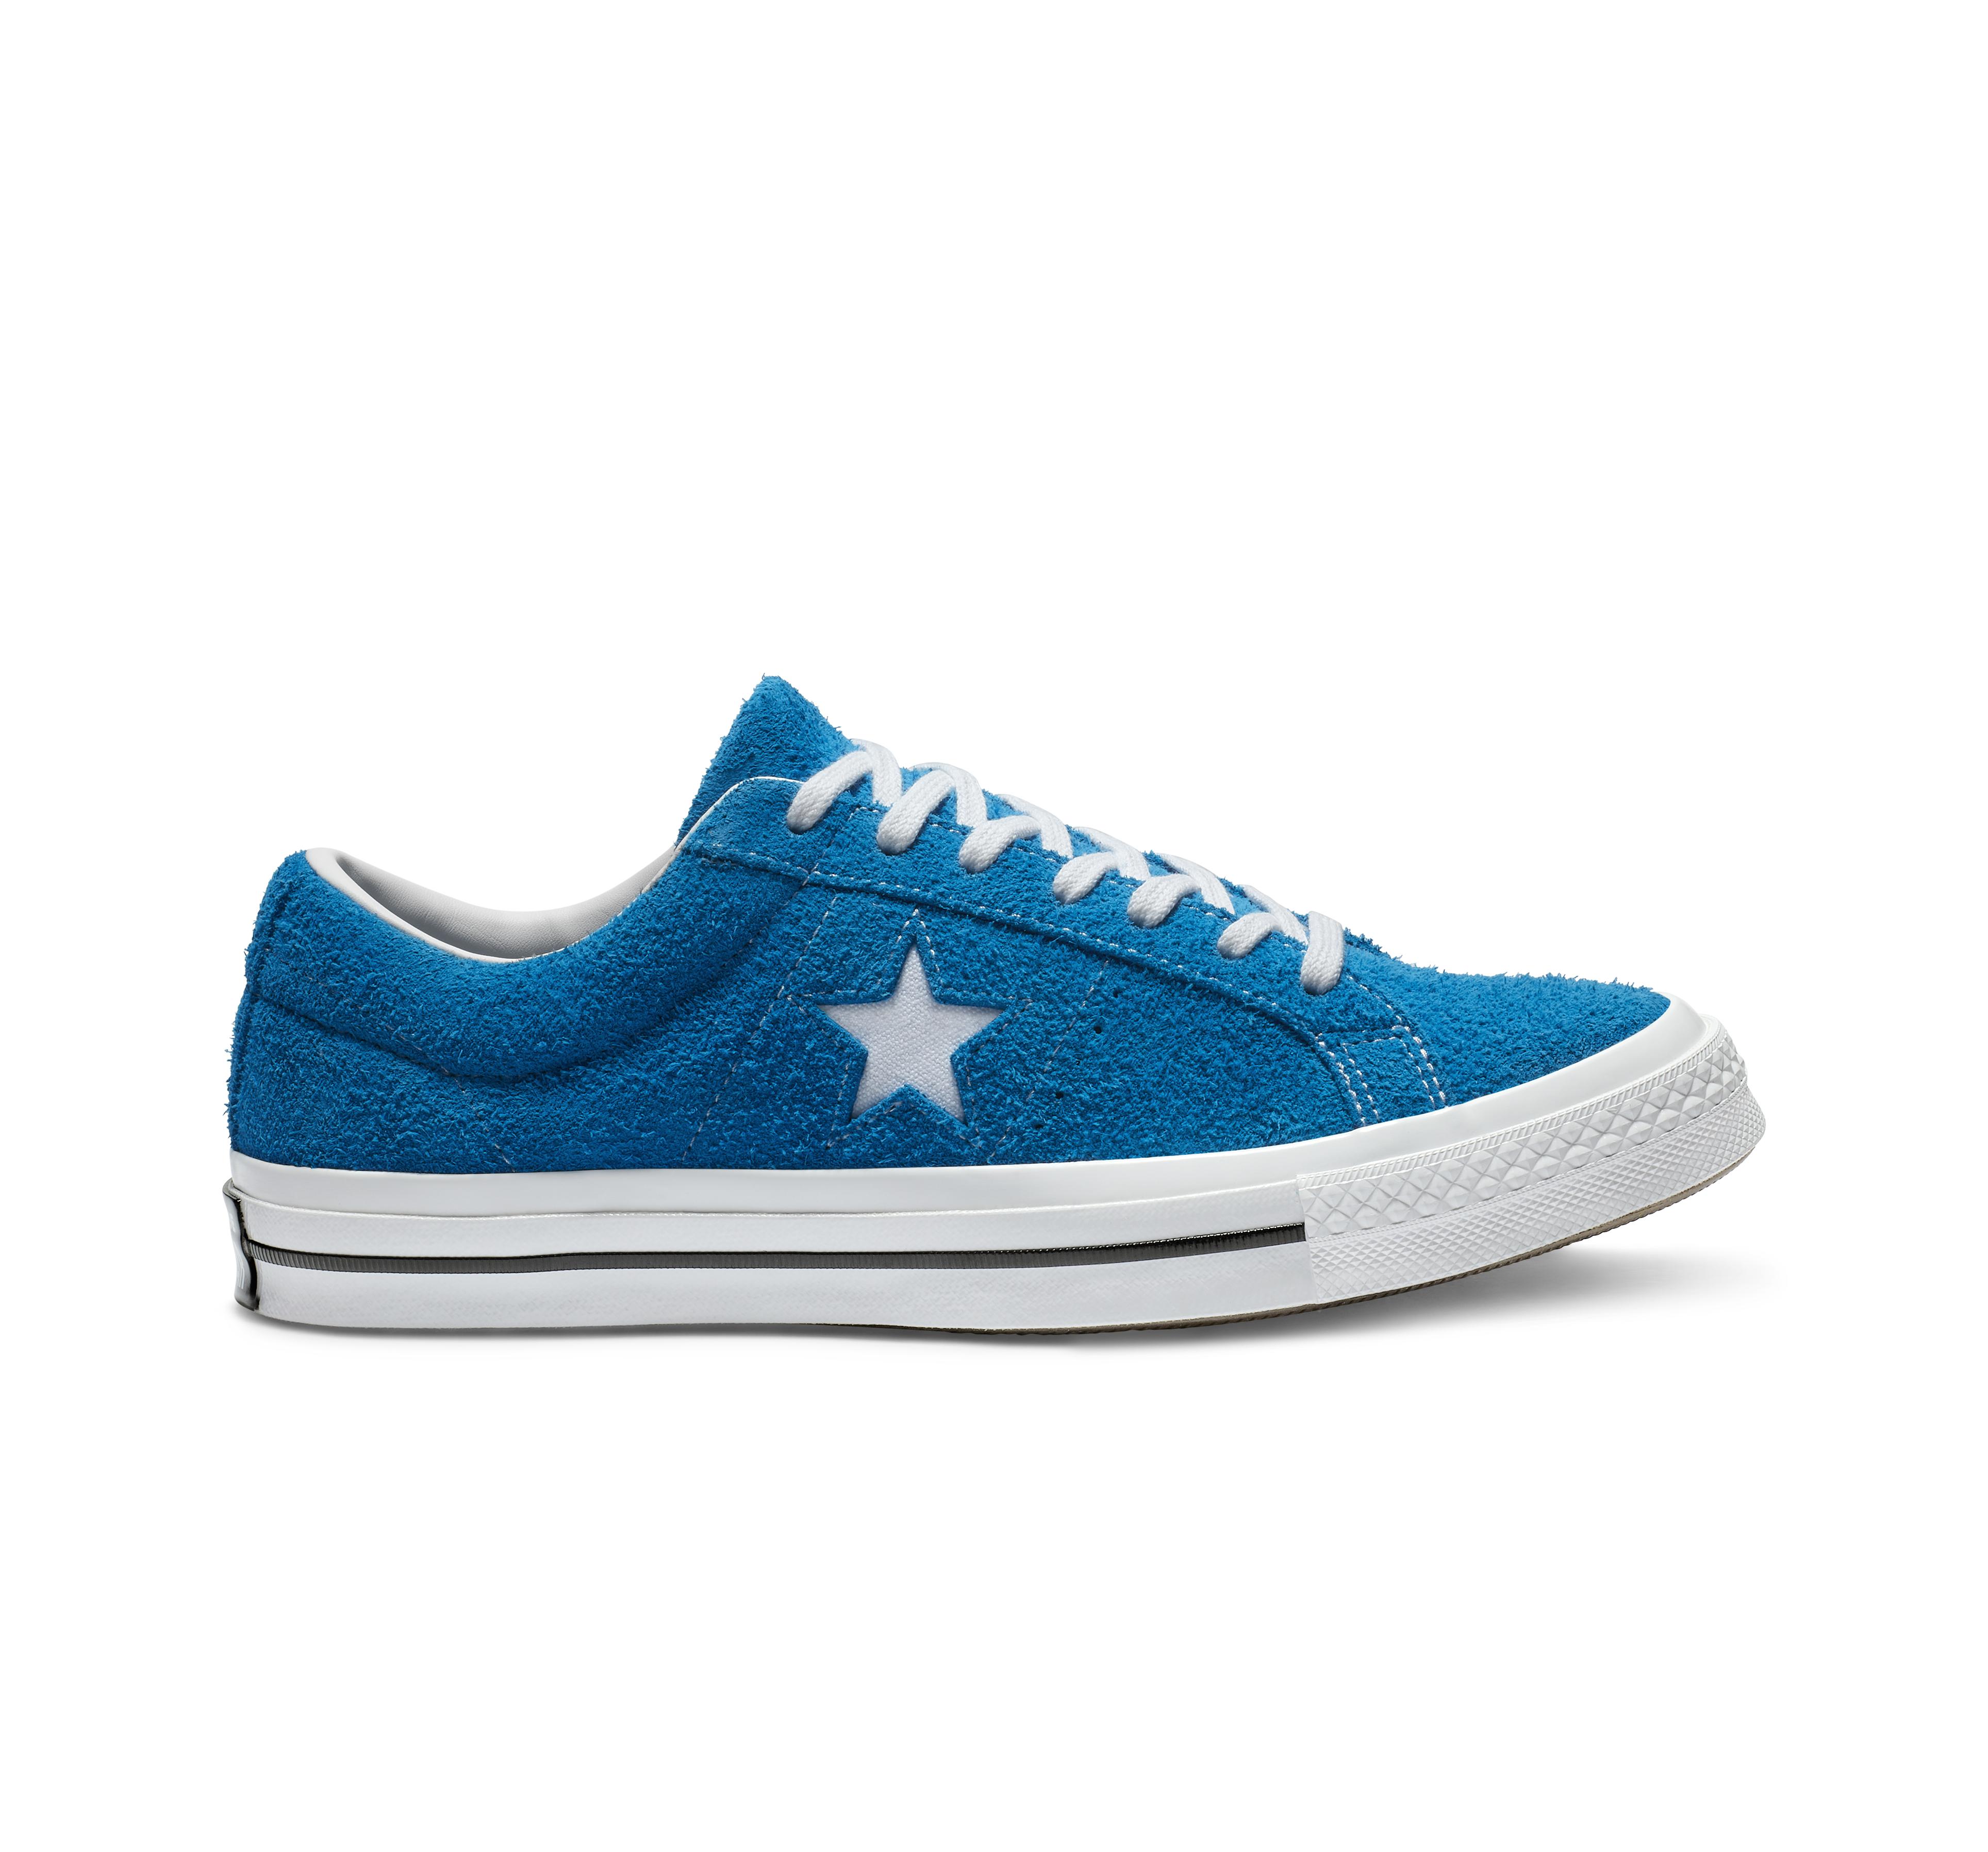 Converse One Star Vintage Suede Low Top in Blue for Men - Lyst